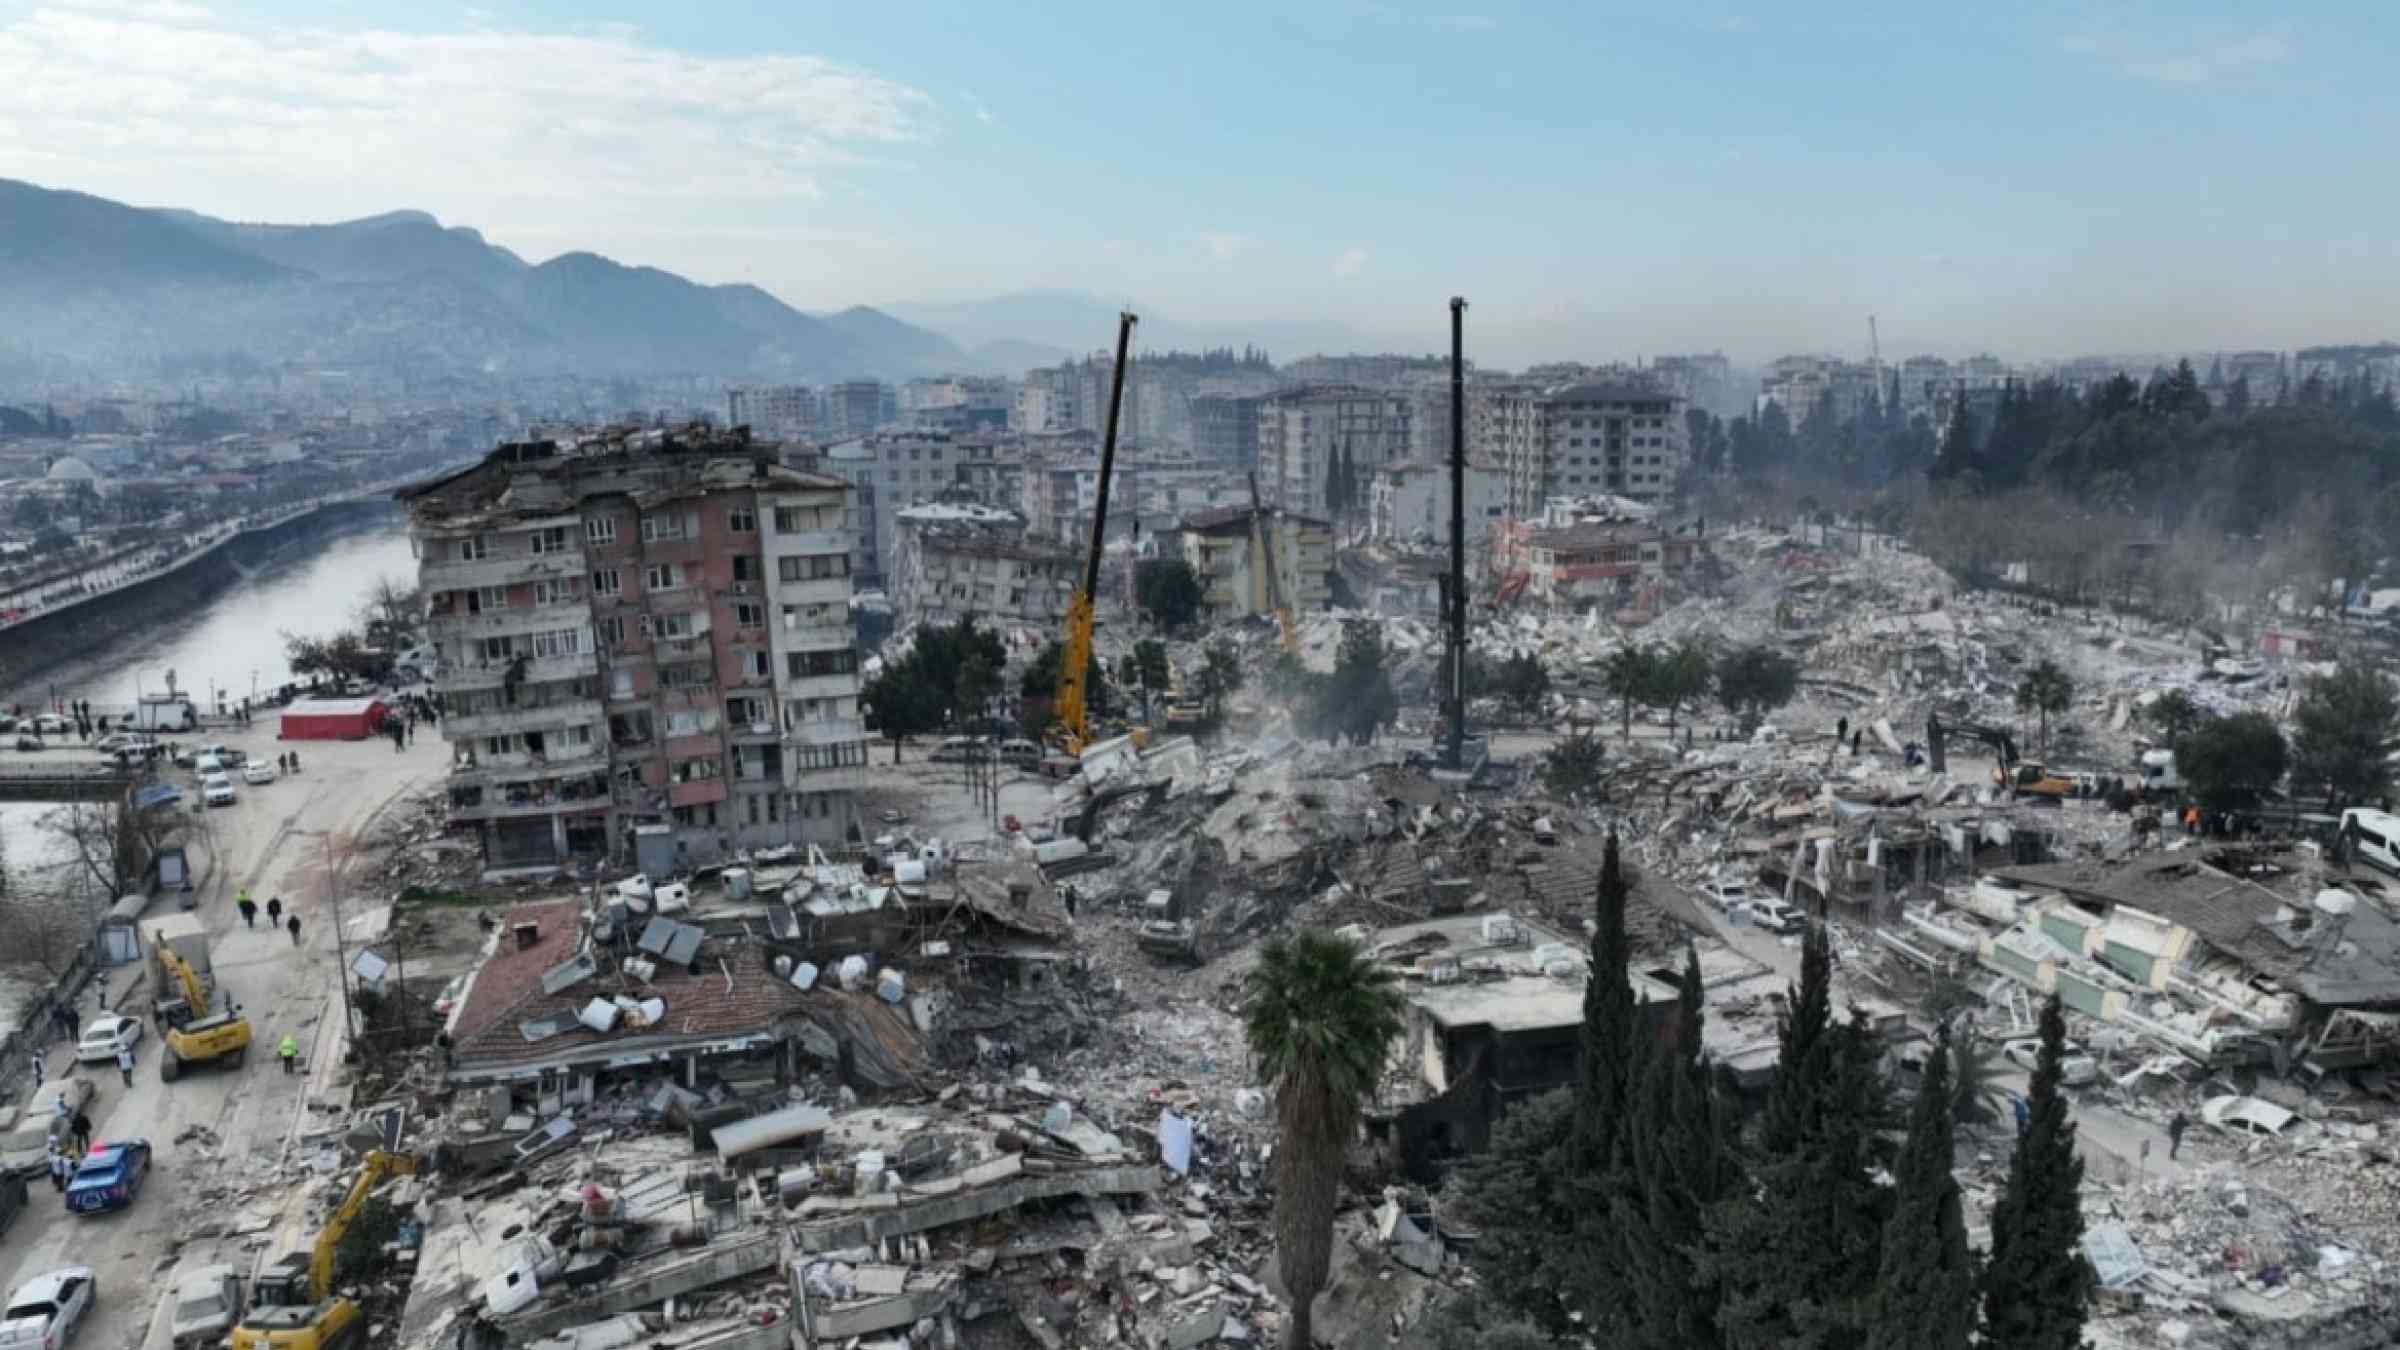 Azerbaijani soldiers take part in search and rescue efforts after 7.7 and 7.6 magnitude earthquakes hit Kahramanmaras, Turkiye on February 10, 2023.